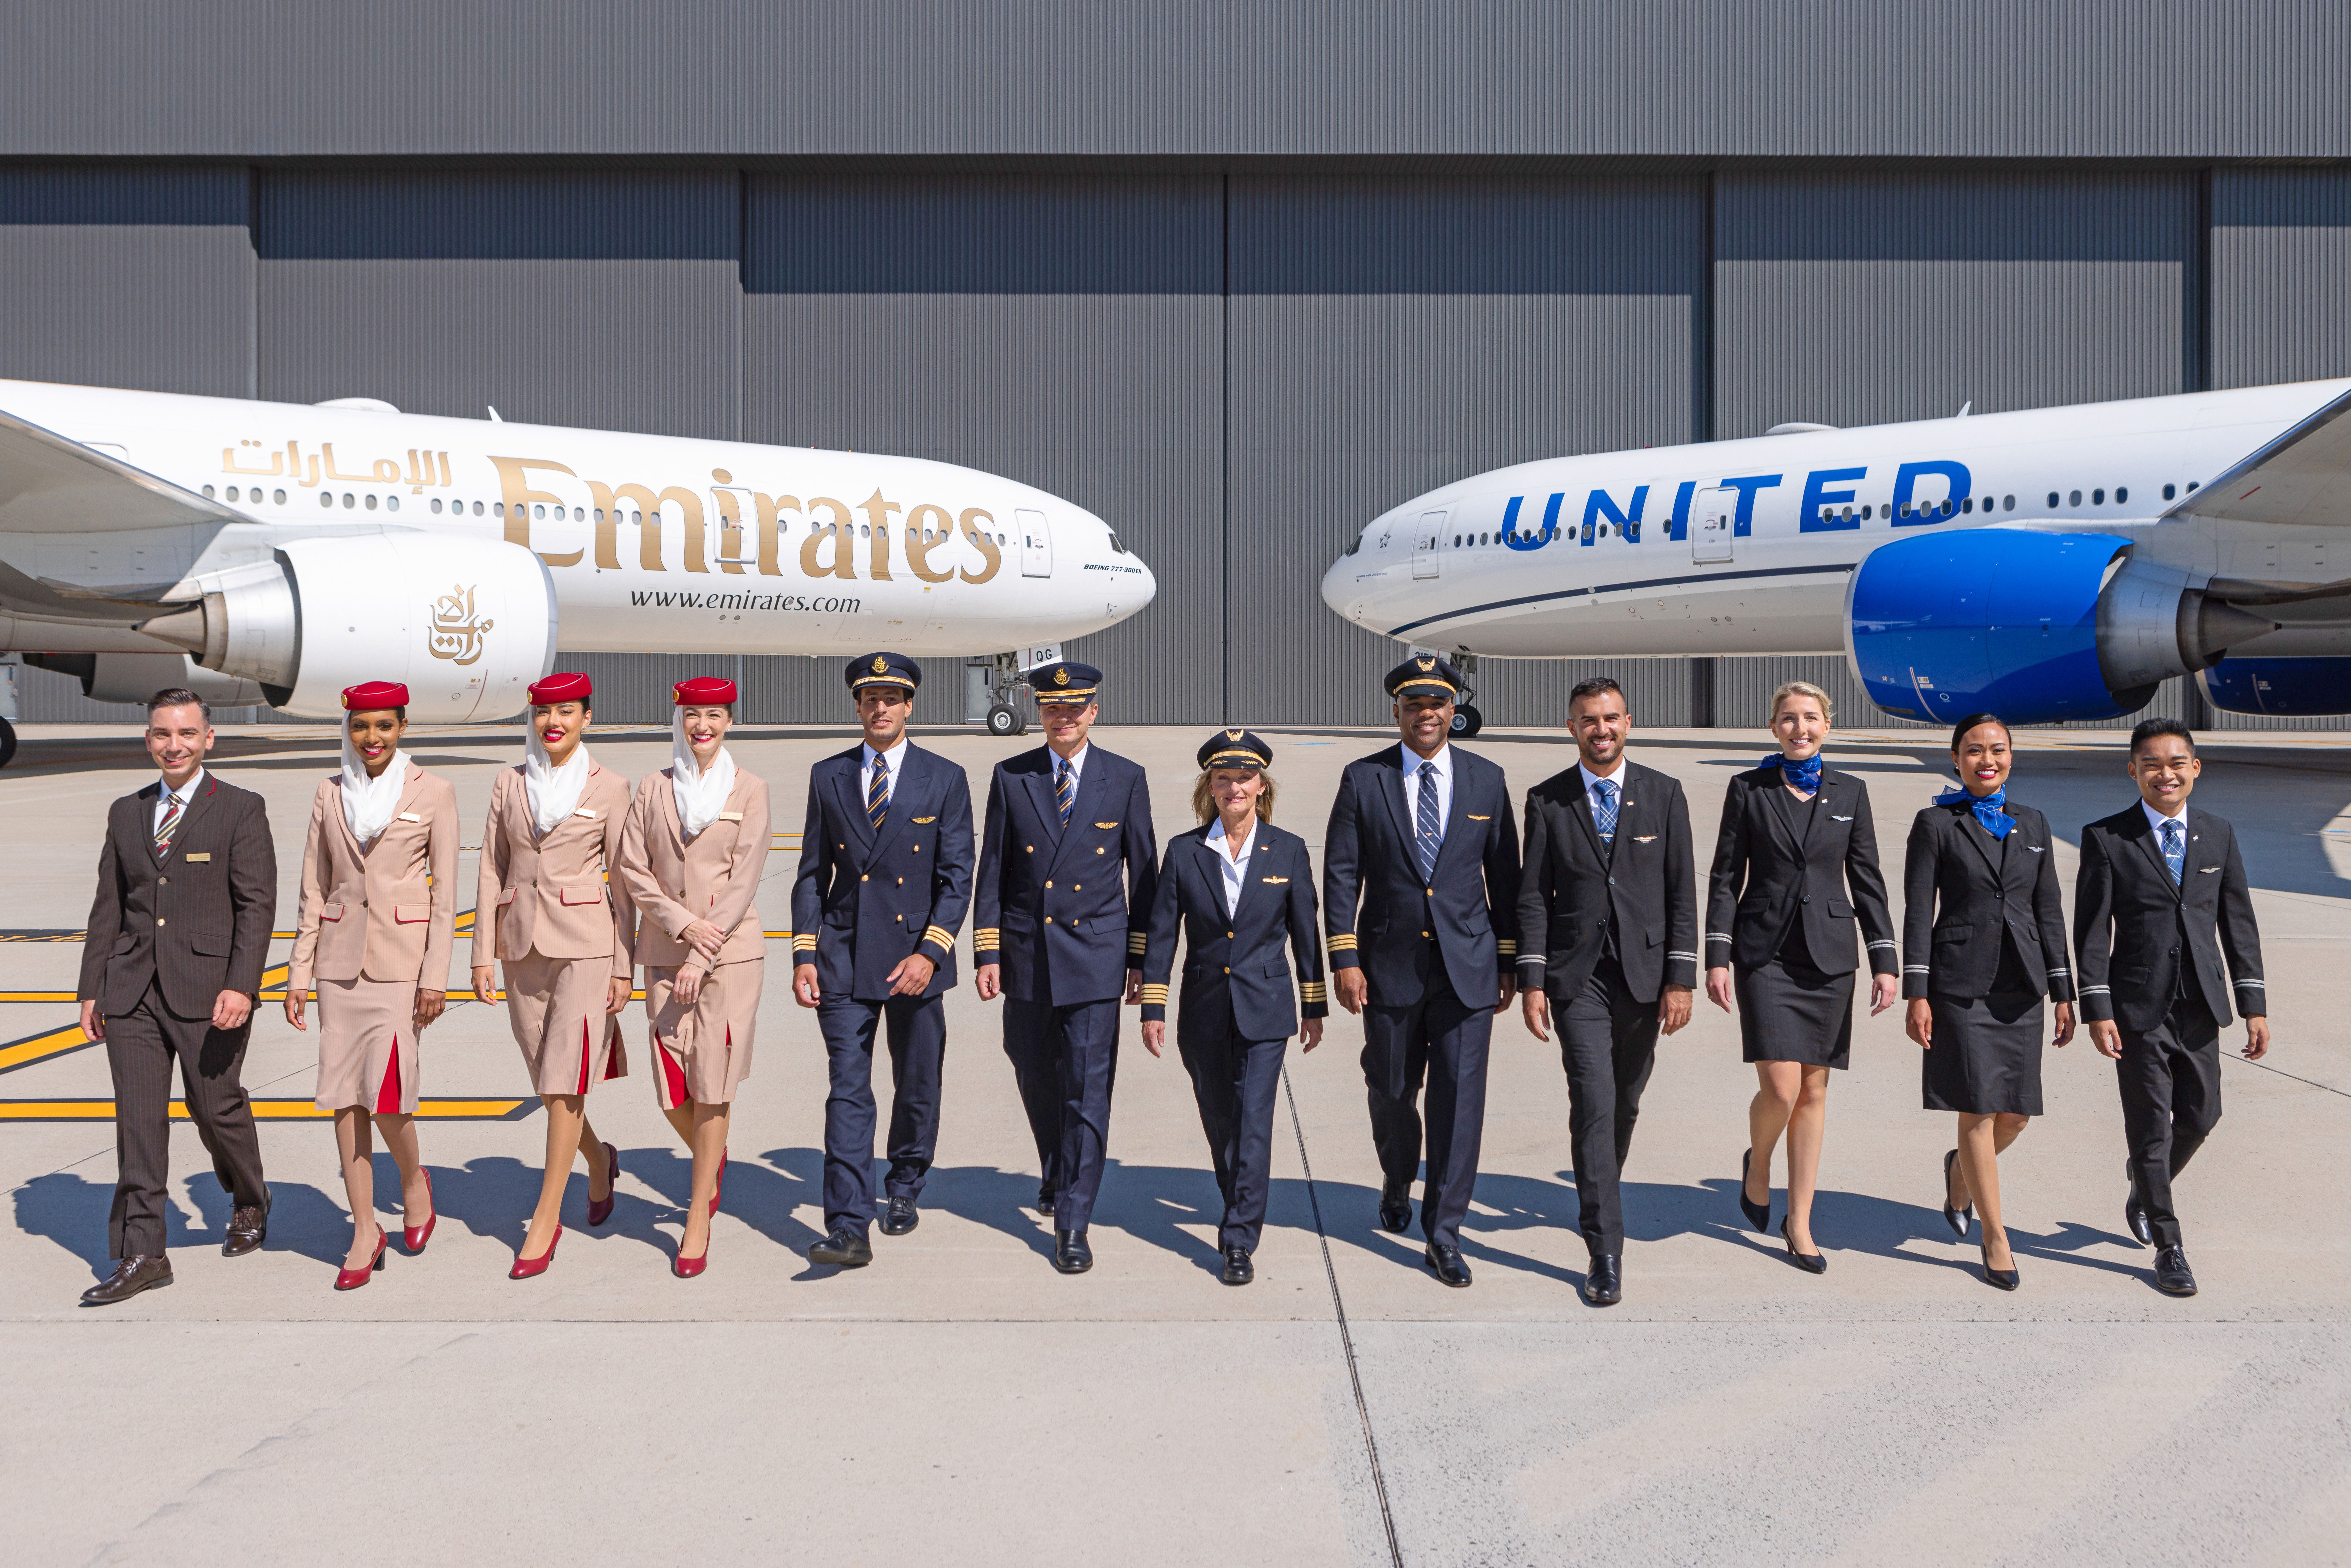 Emirates and United Airlines aircraft parked side by side near a hangar, with cabin crew from both airlines standing together.